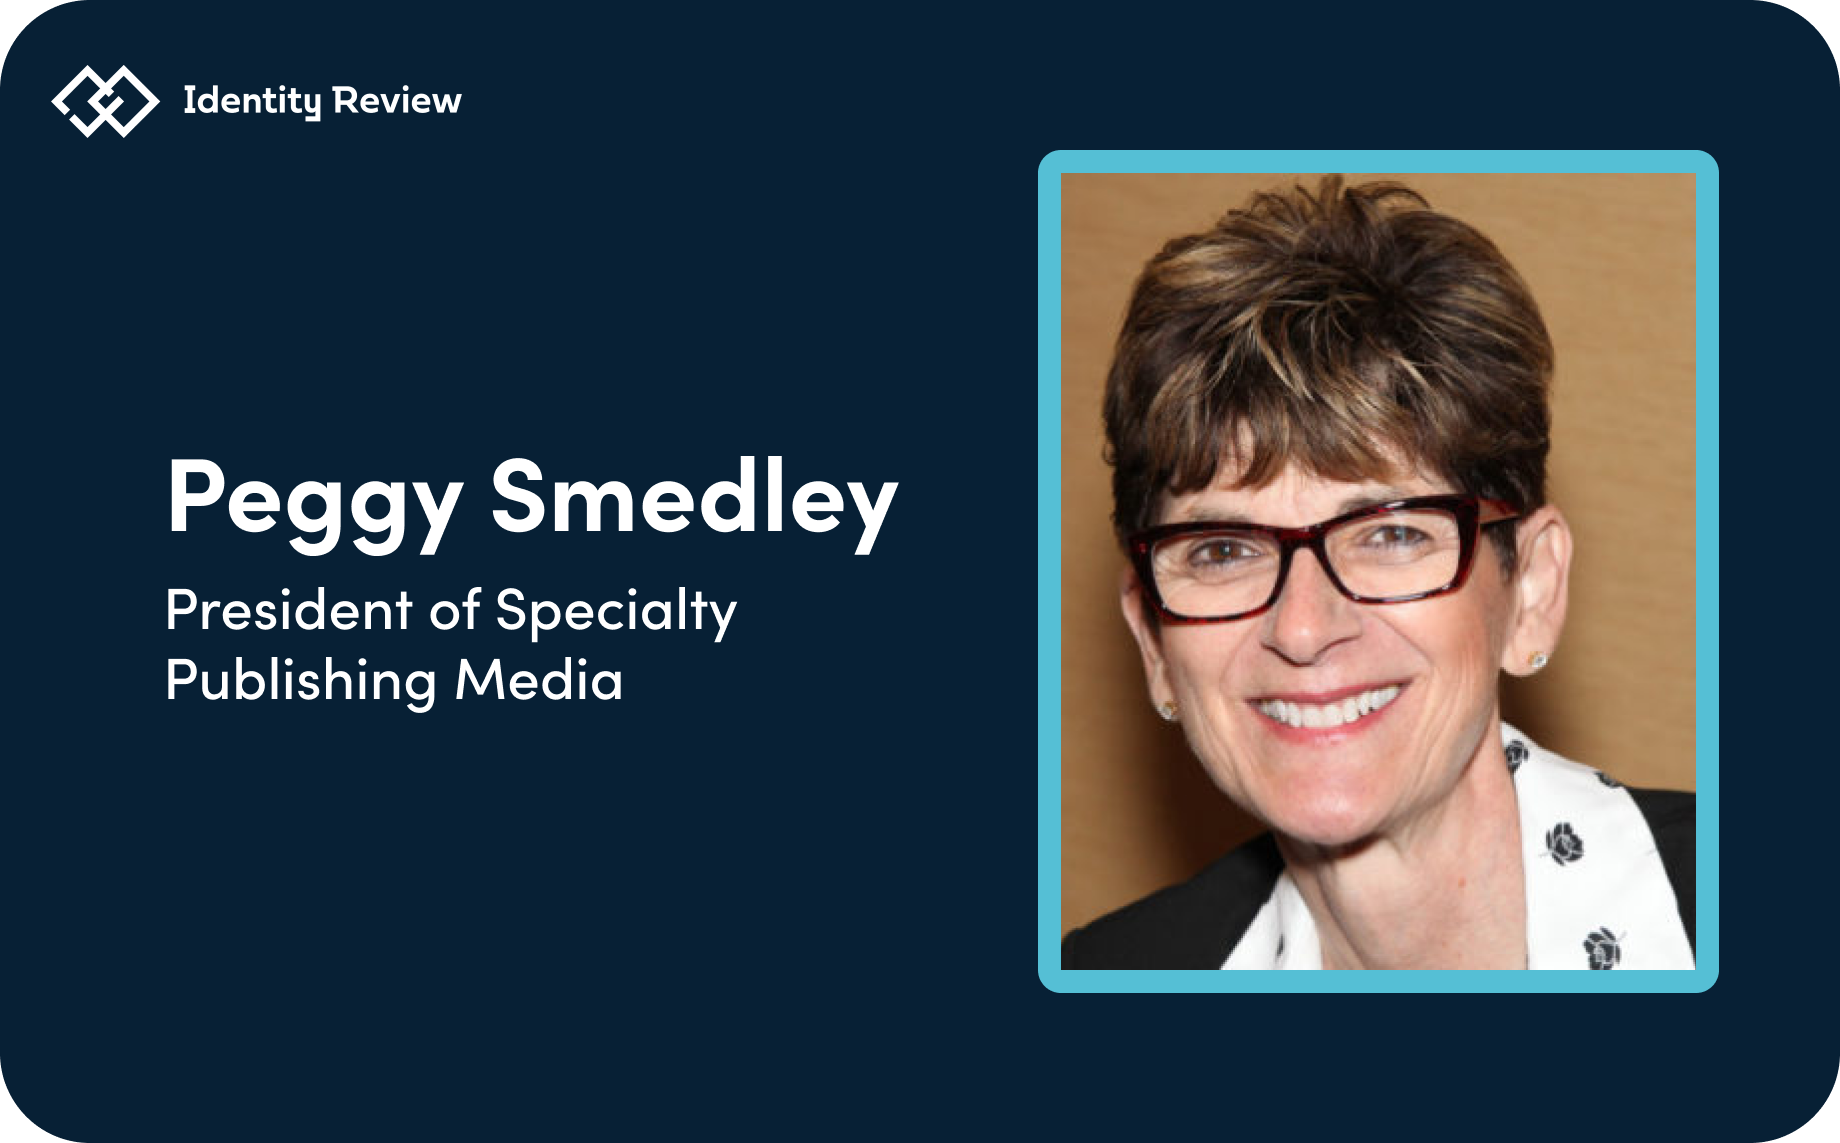 10 IoT Leaders, Peggy Smedley